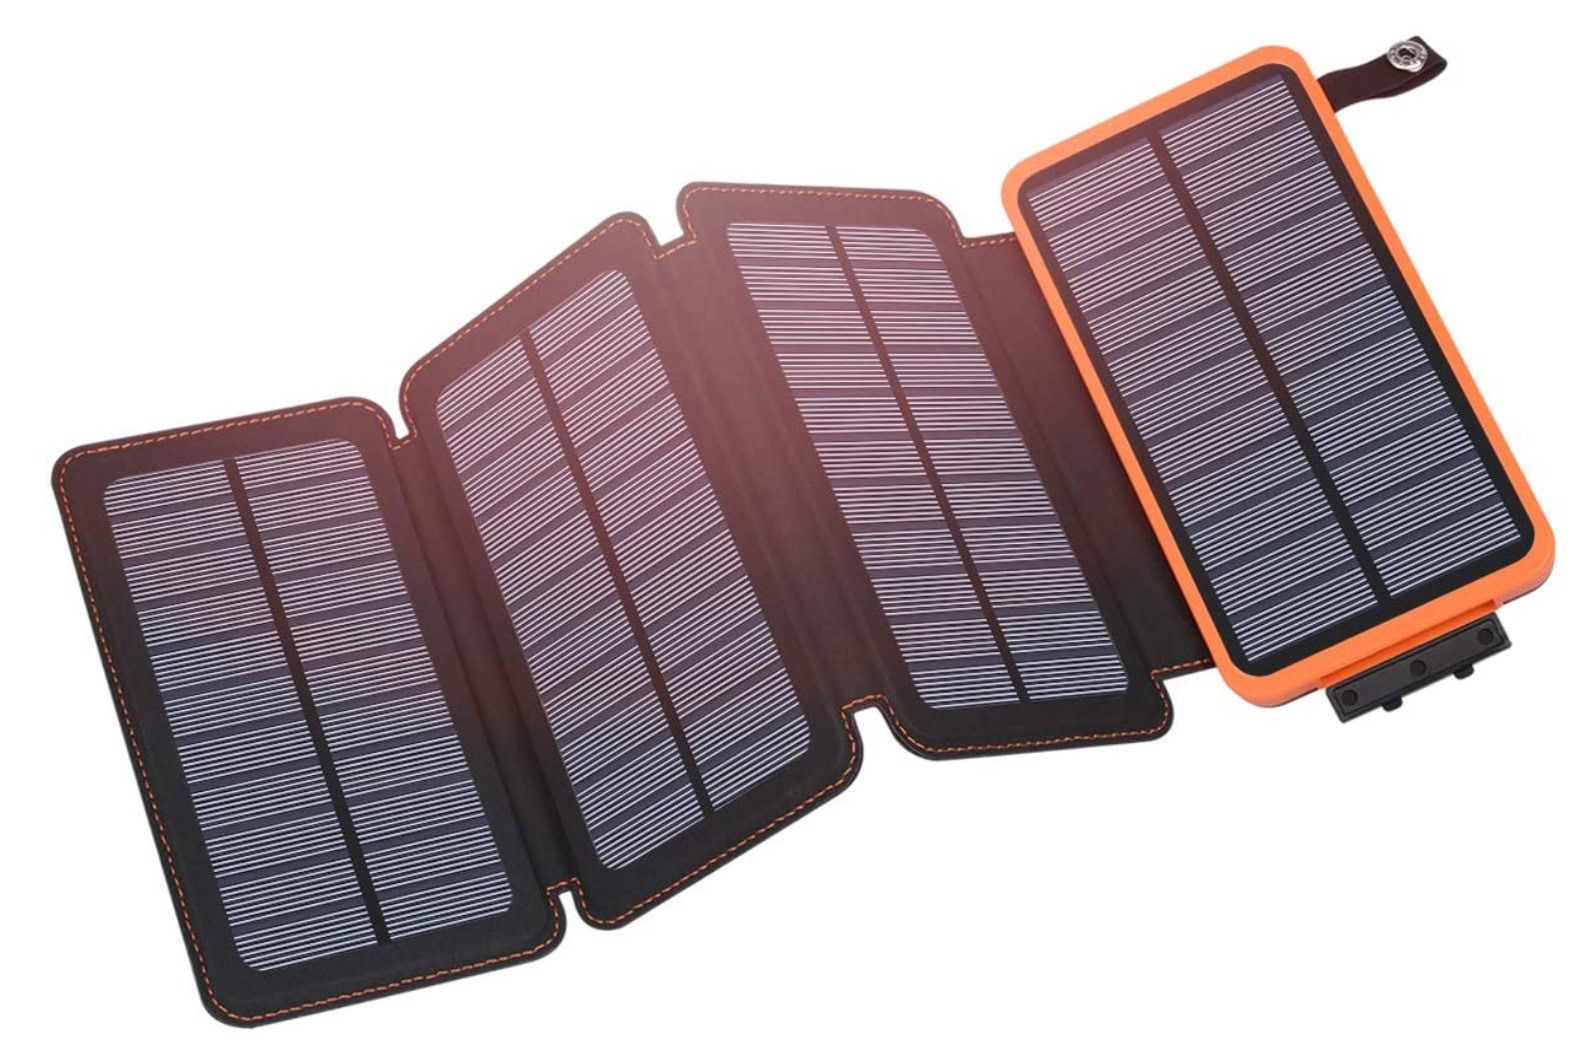 TIGPOW 6W Portable Solar Charger,Solar Power,Compatible with Phones/Tablets/GPS and Other Devices Charging,for Family Camping/Travel/Hiking Various Outdoor Activities 